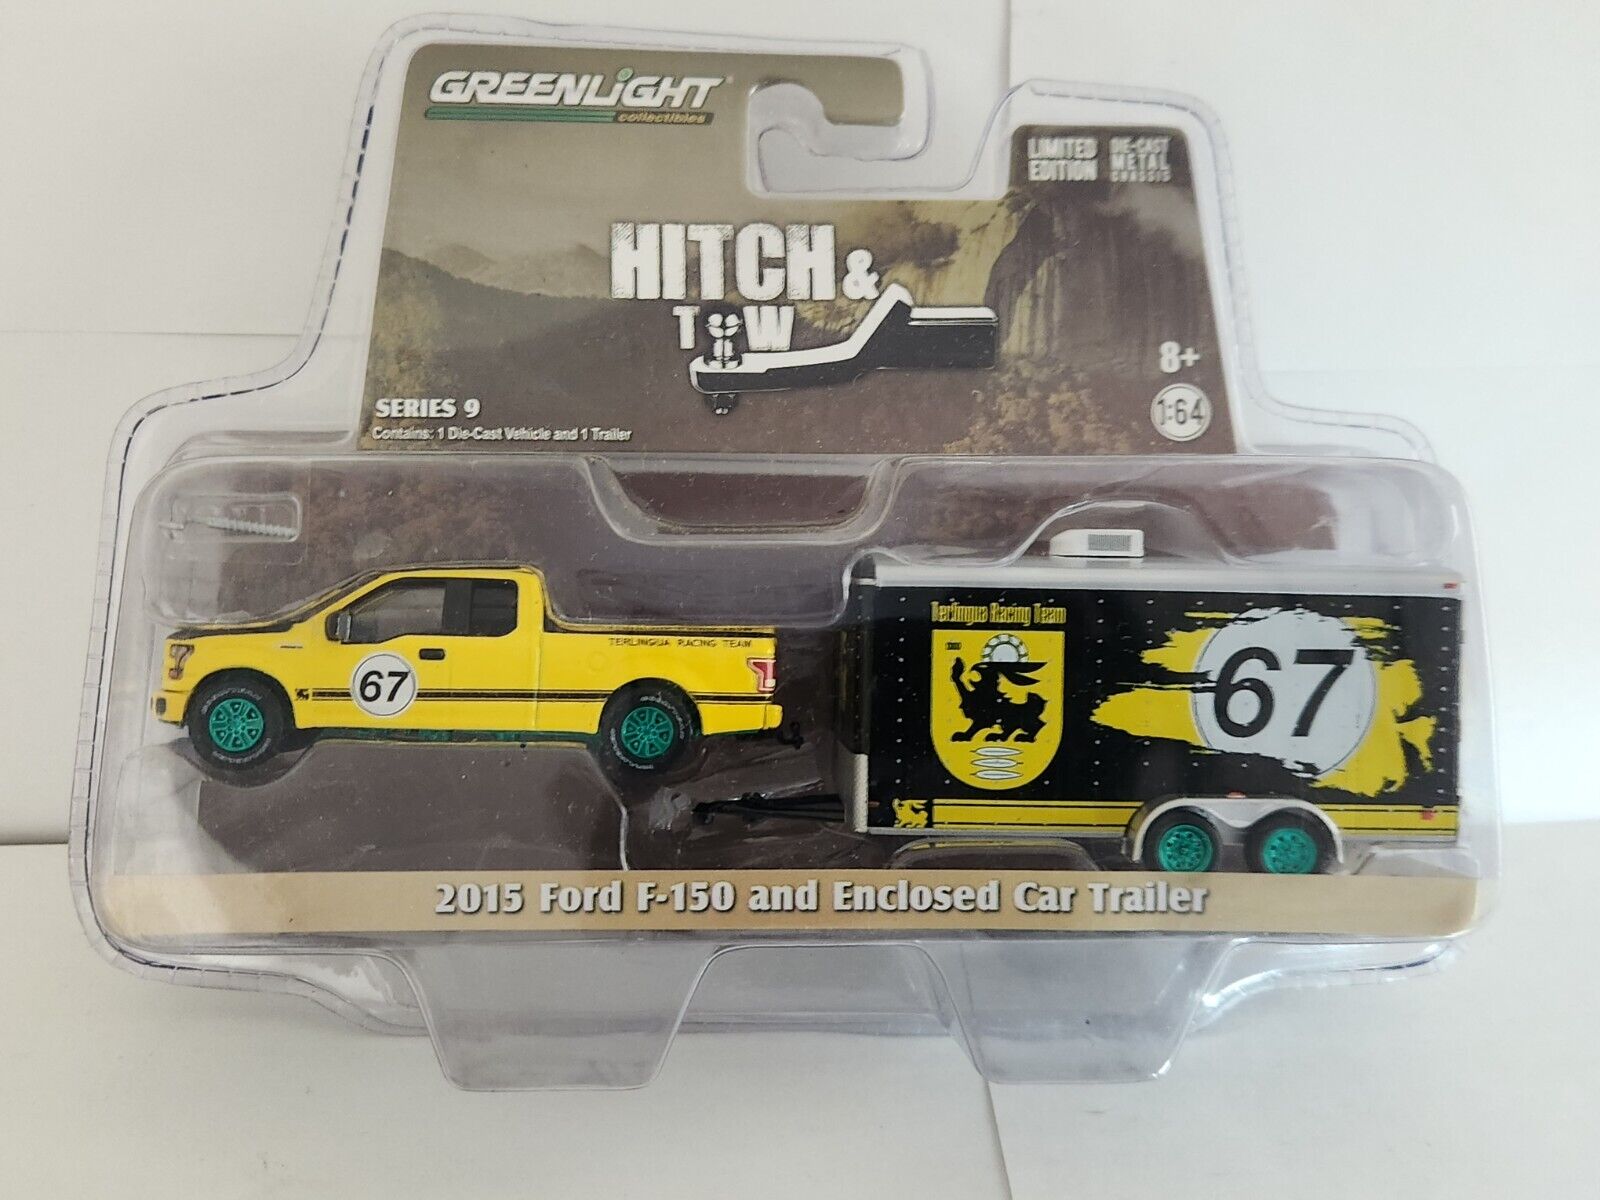 Greenlight Hitch & Tow 2015 Ford F-150 & Enclosed Car Trailer Series 9 Chase L28